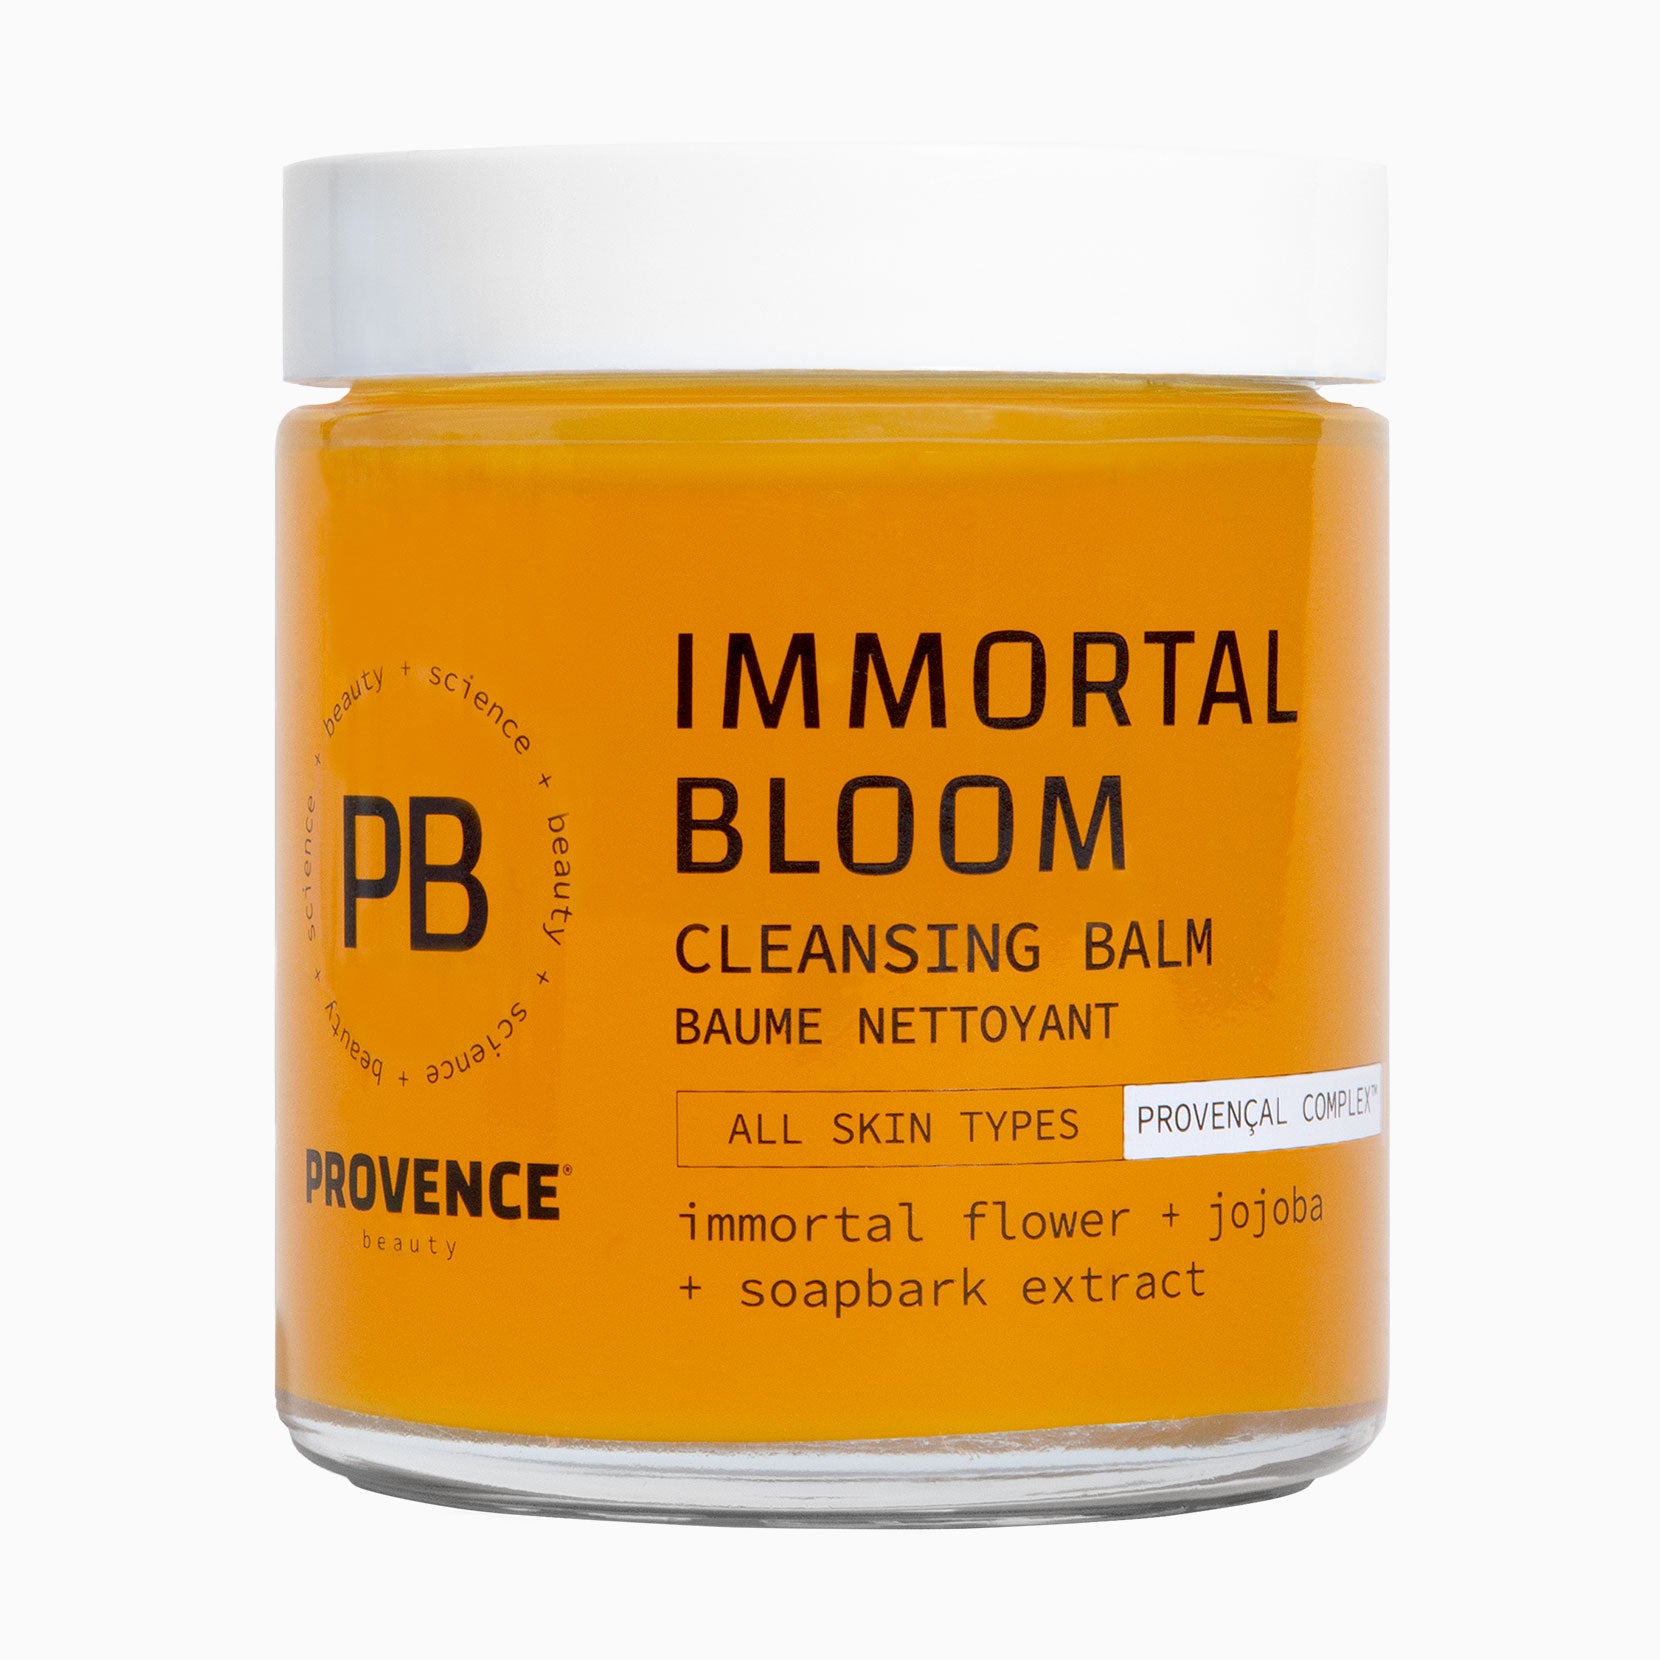 Immortal Bloom Cleansing Balm